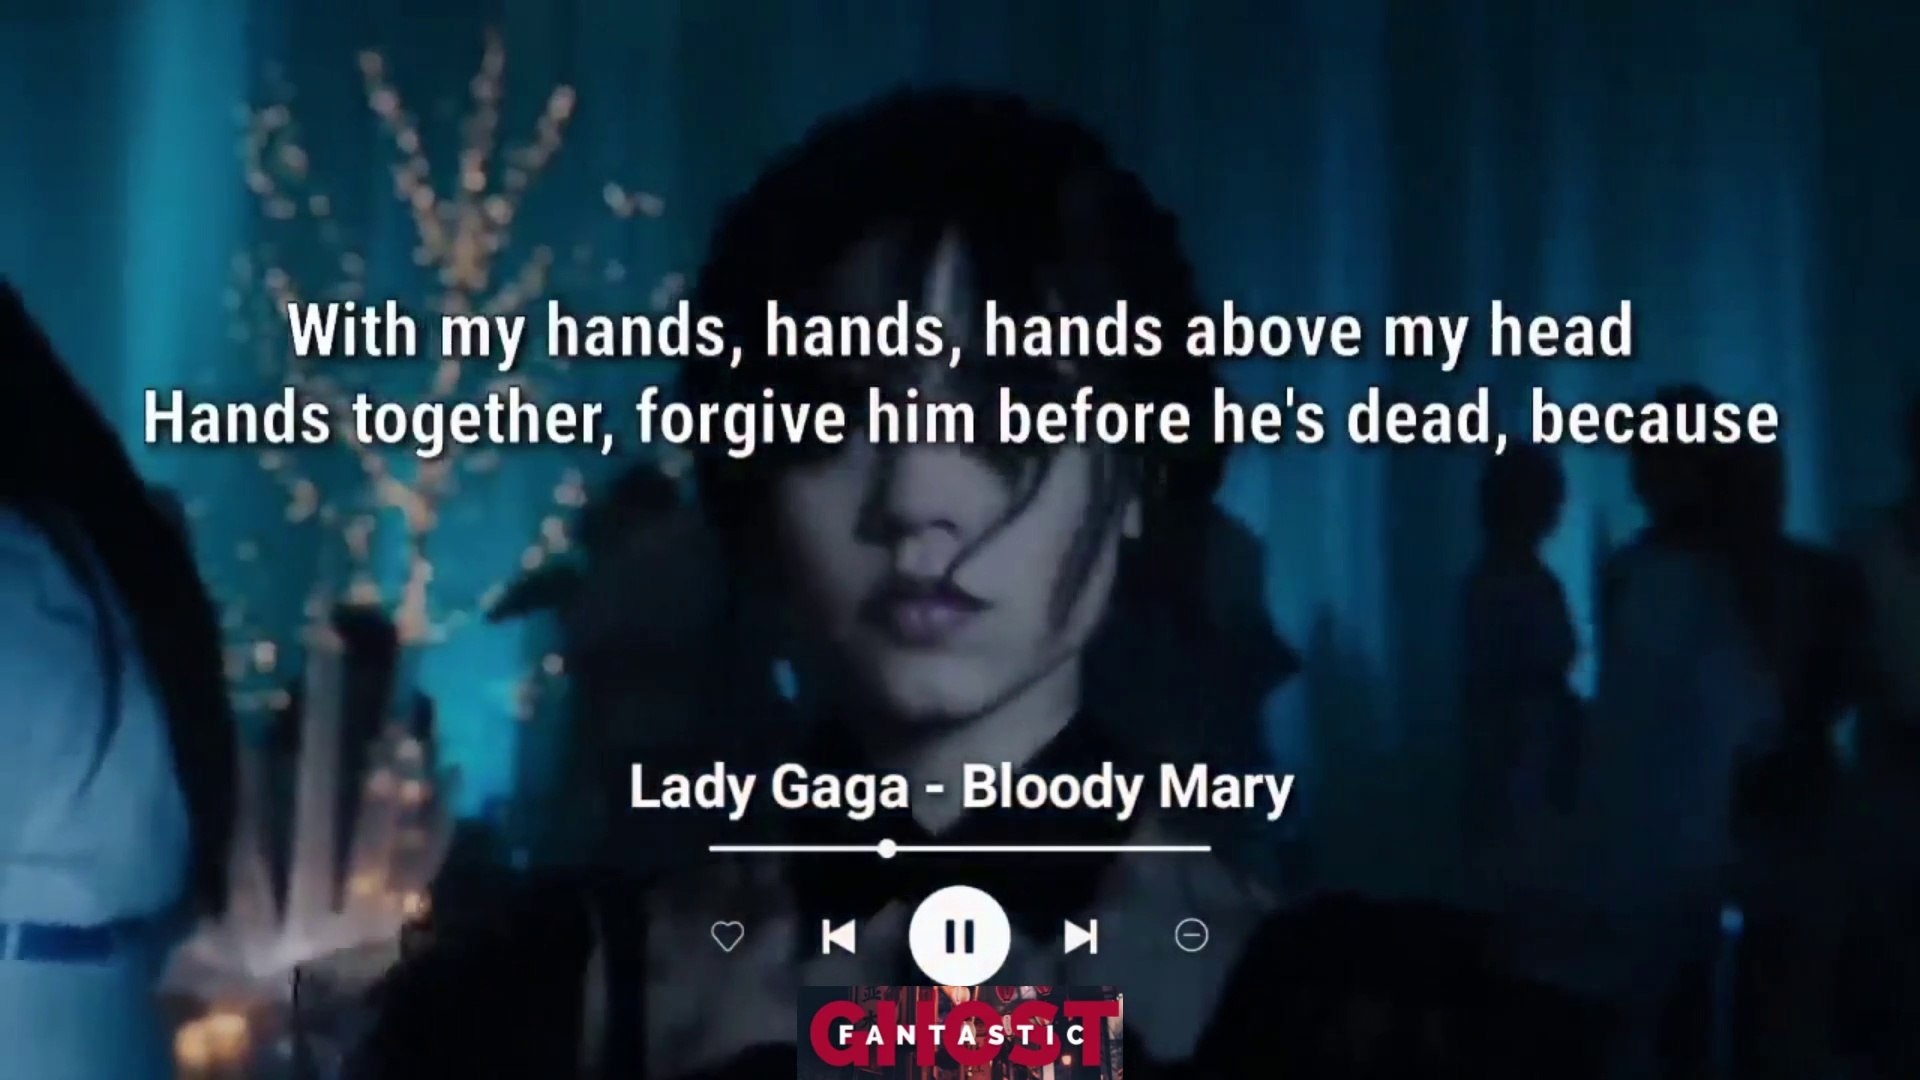 Bloody Mary (Wednesday) - song and lyrics by Zusebi